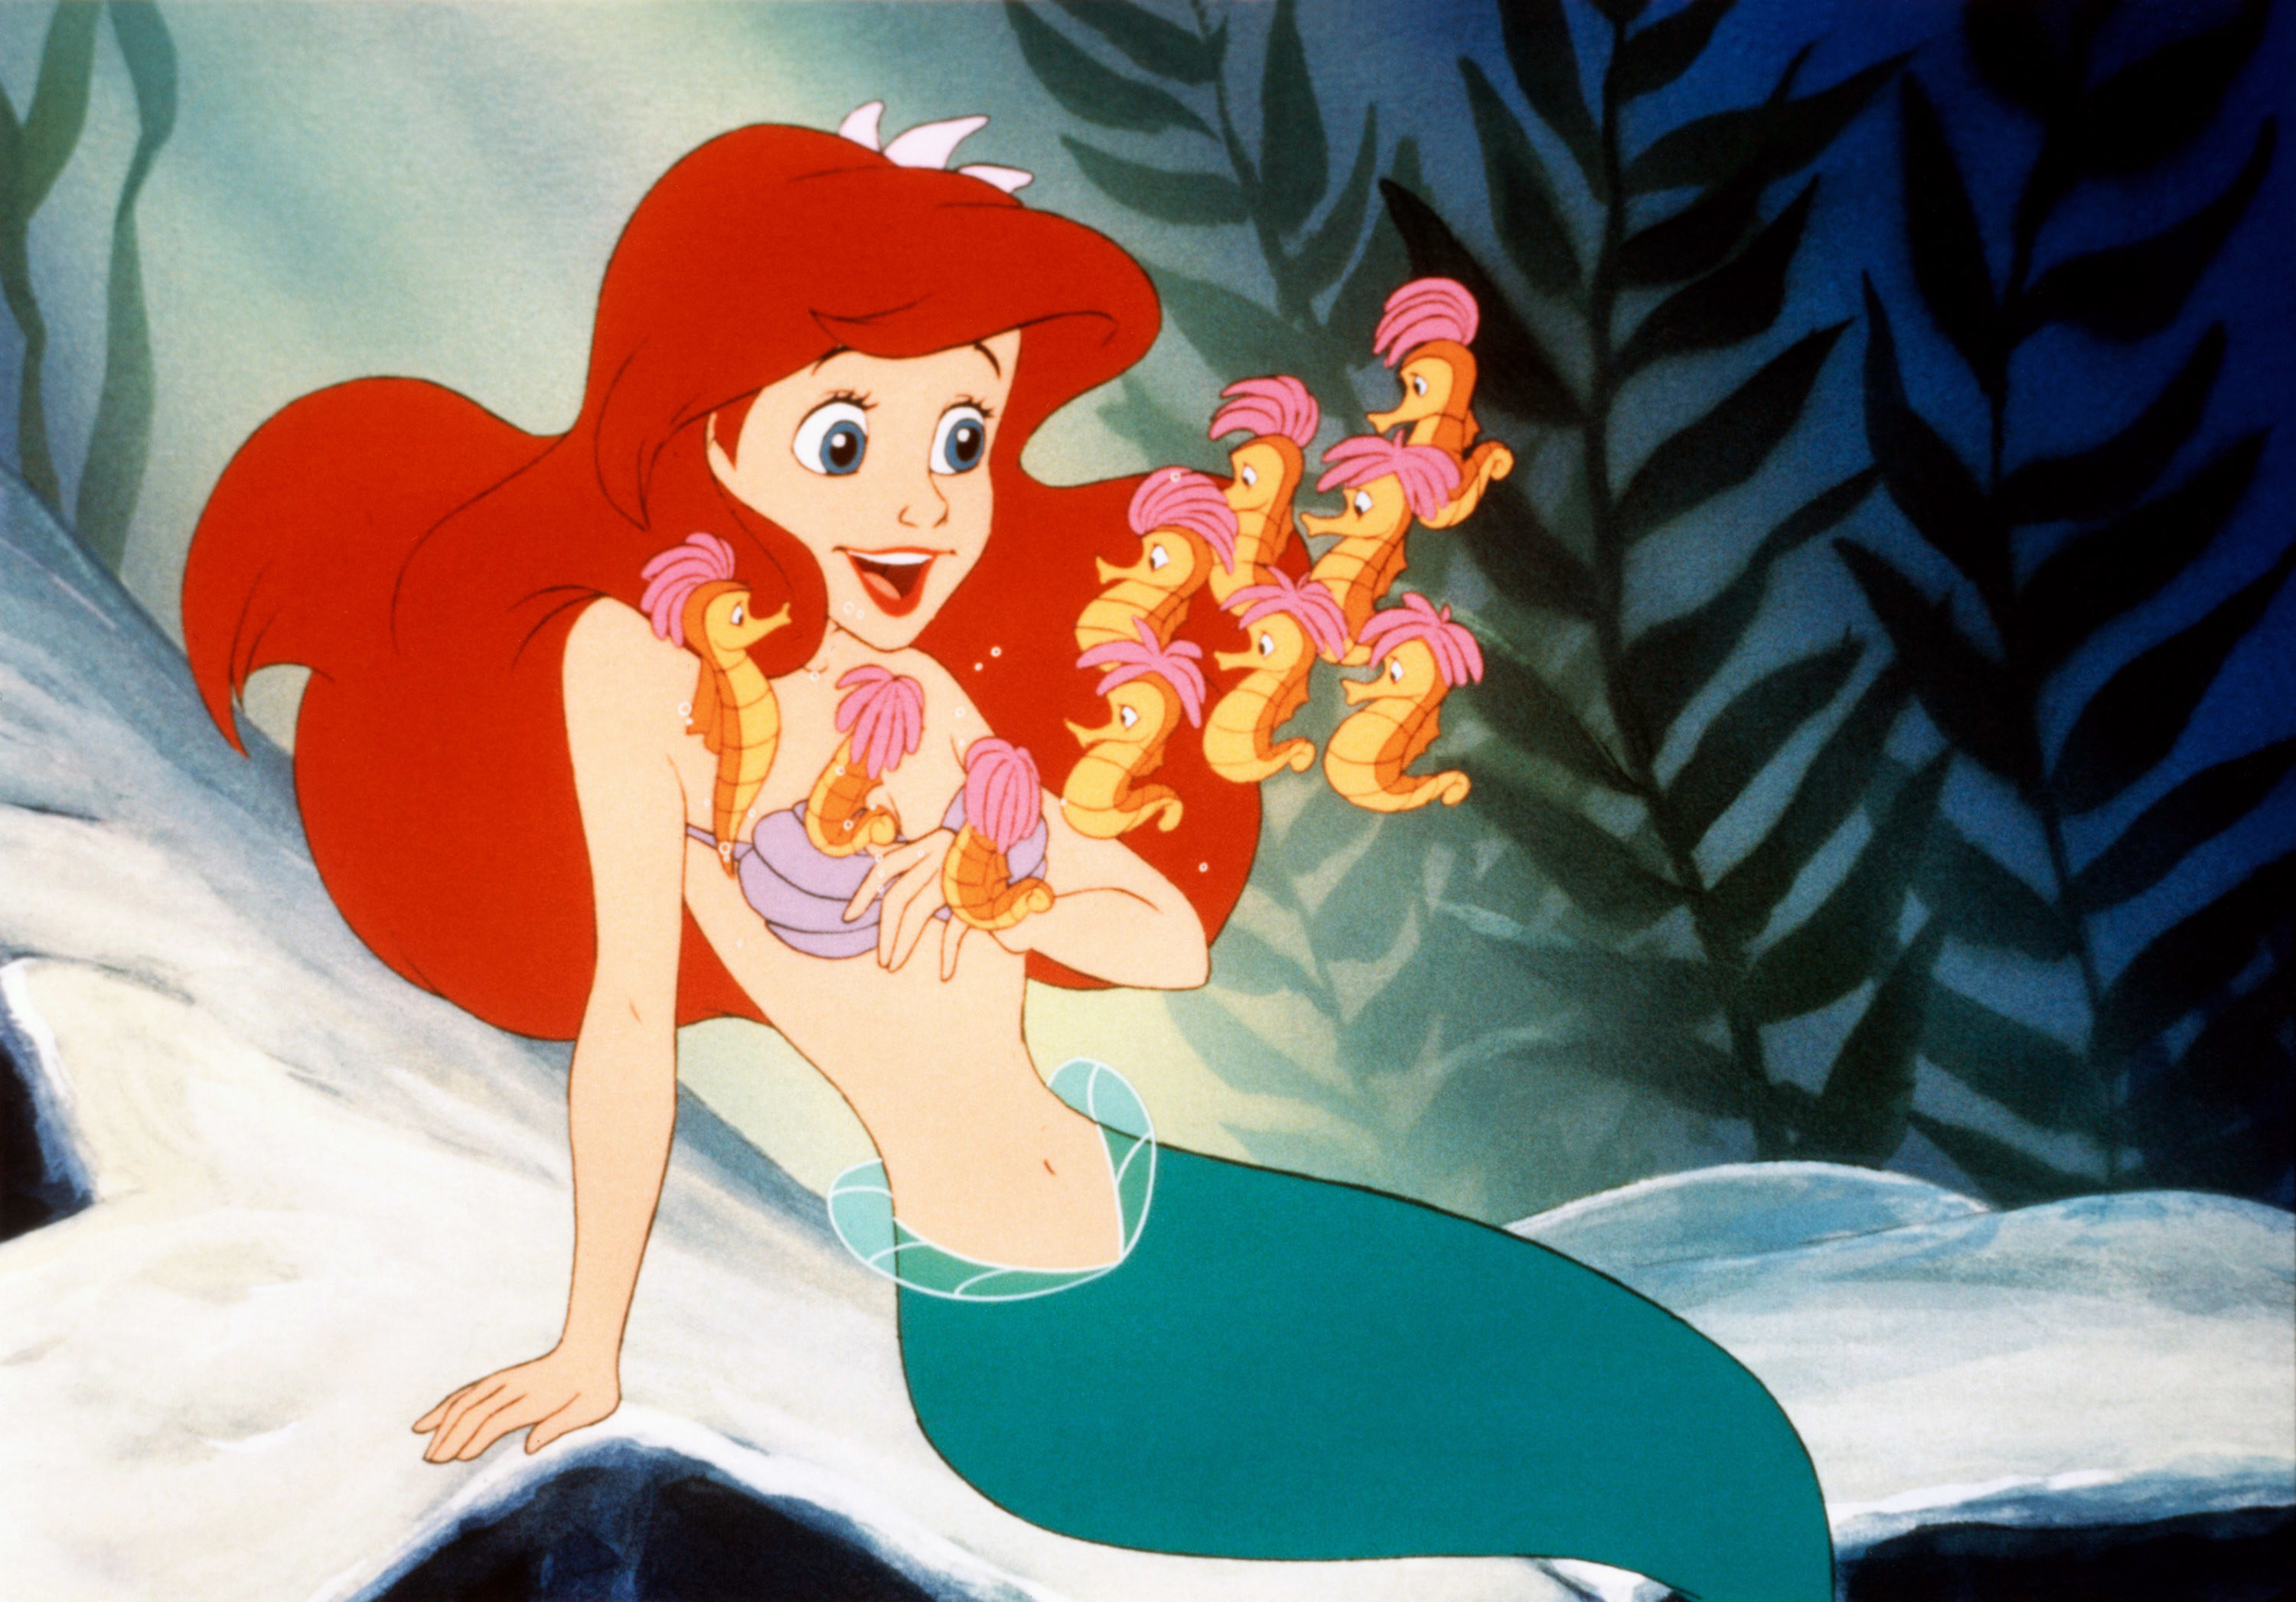 Ariel in the animated version of The Little Mermaid